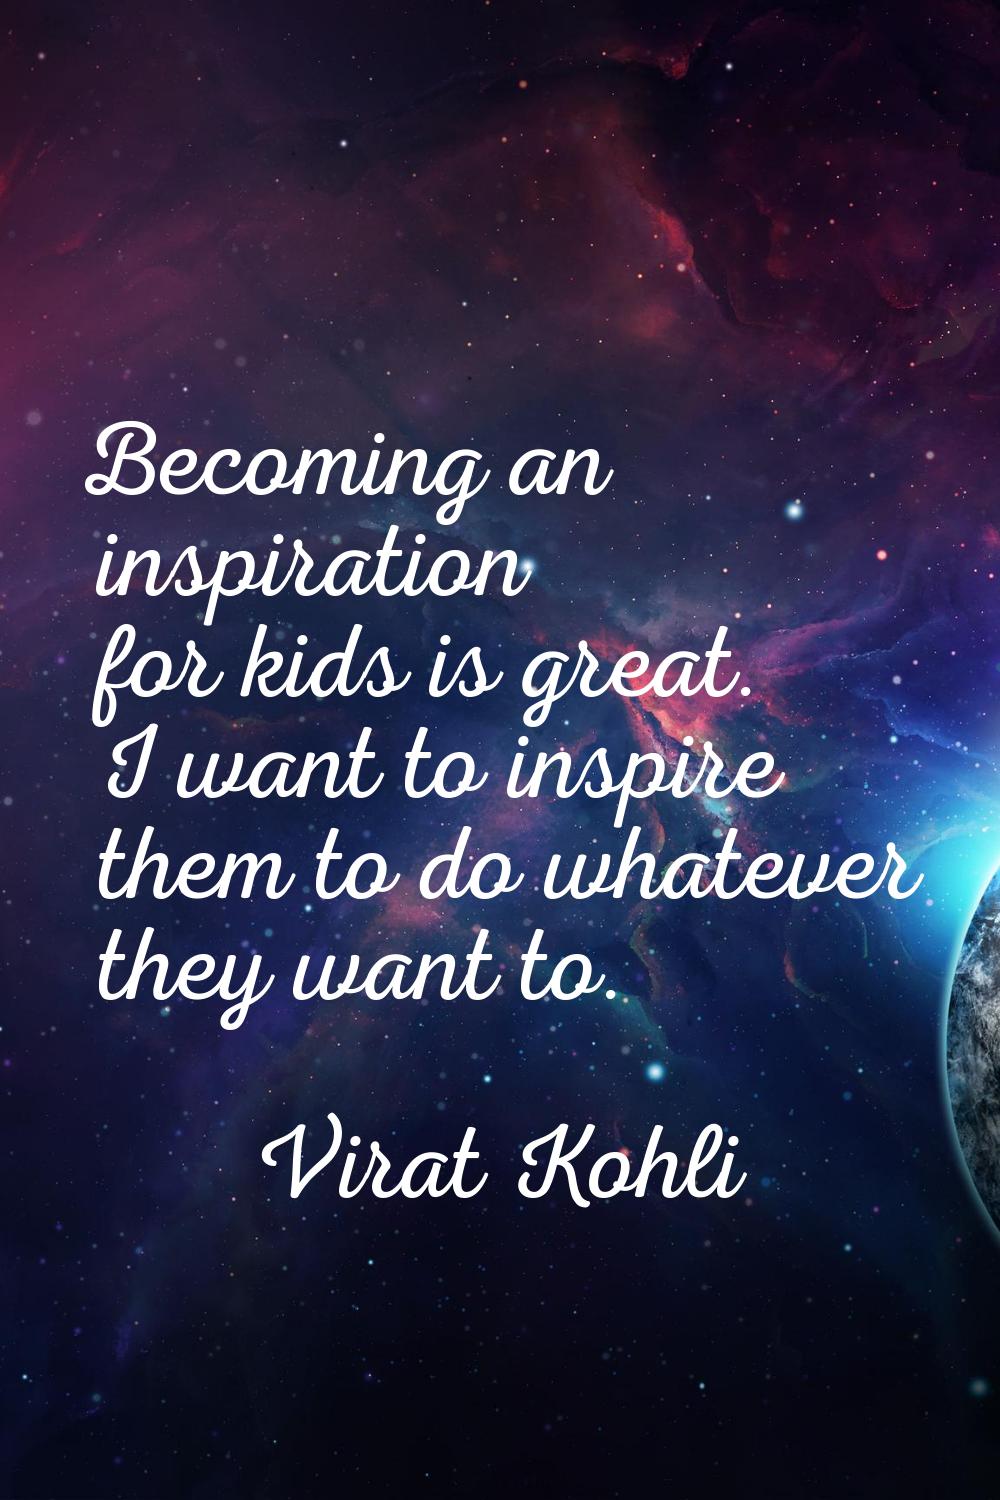 Becoming an inspiration for kids is great. I want to inspire them to do whatever they want to.